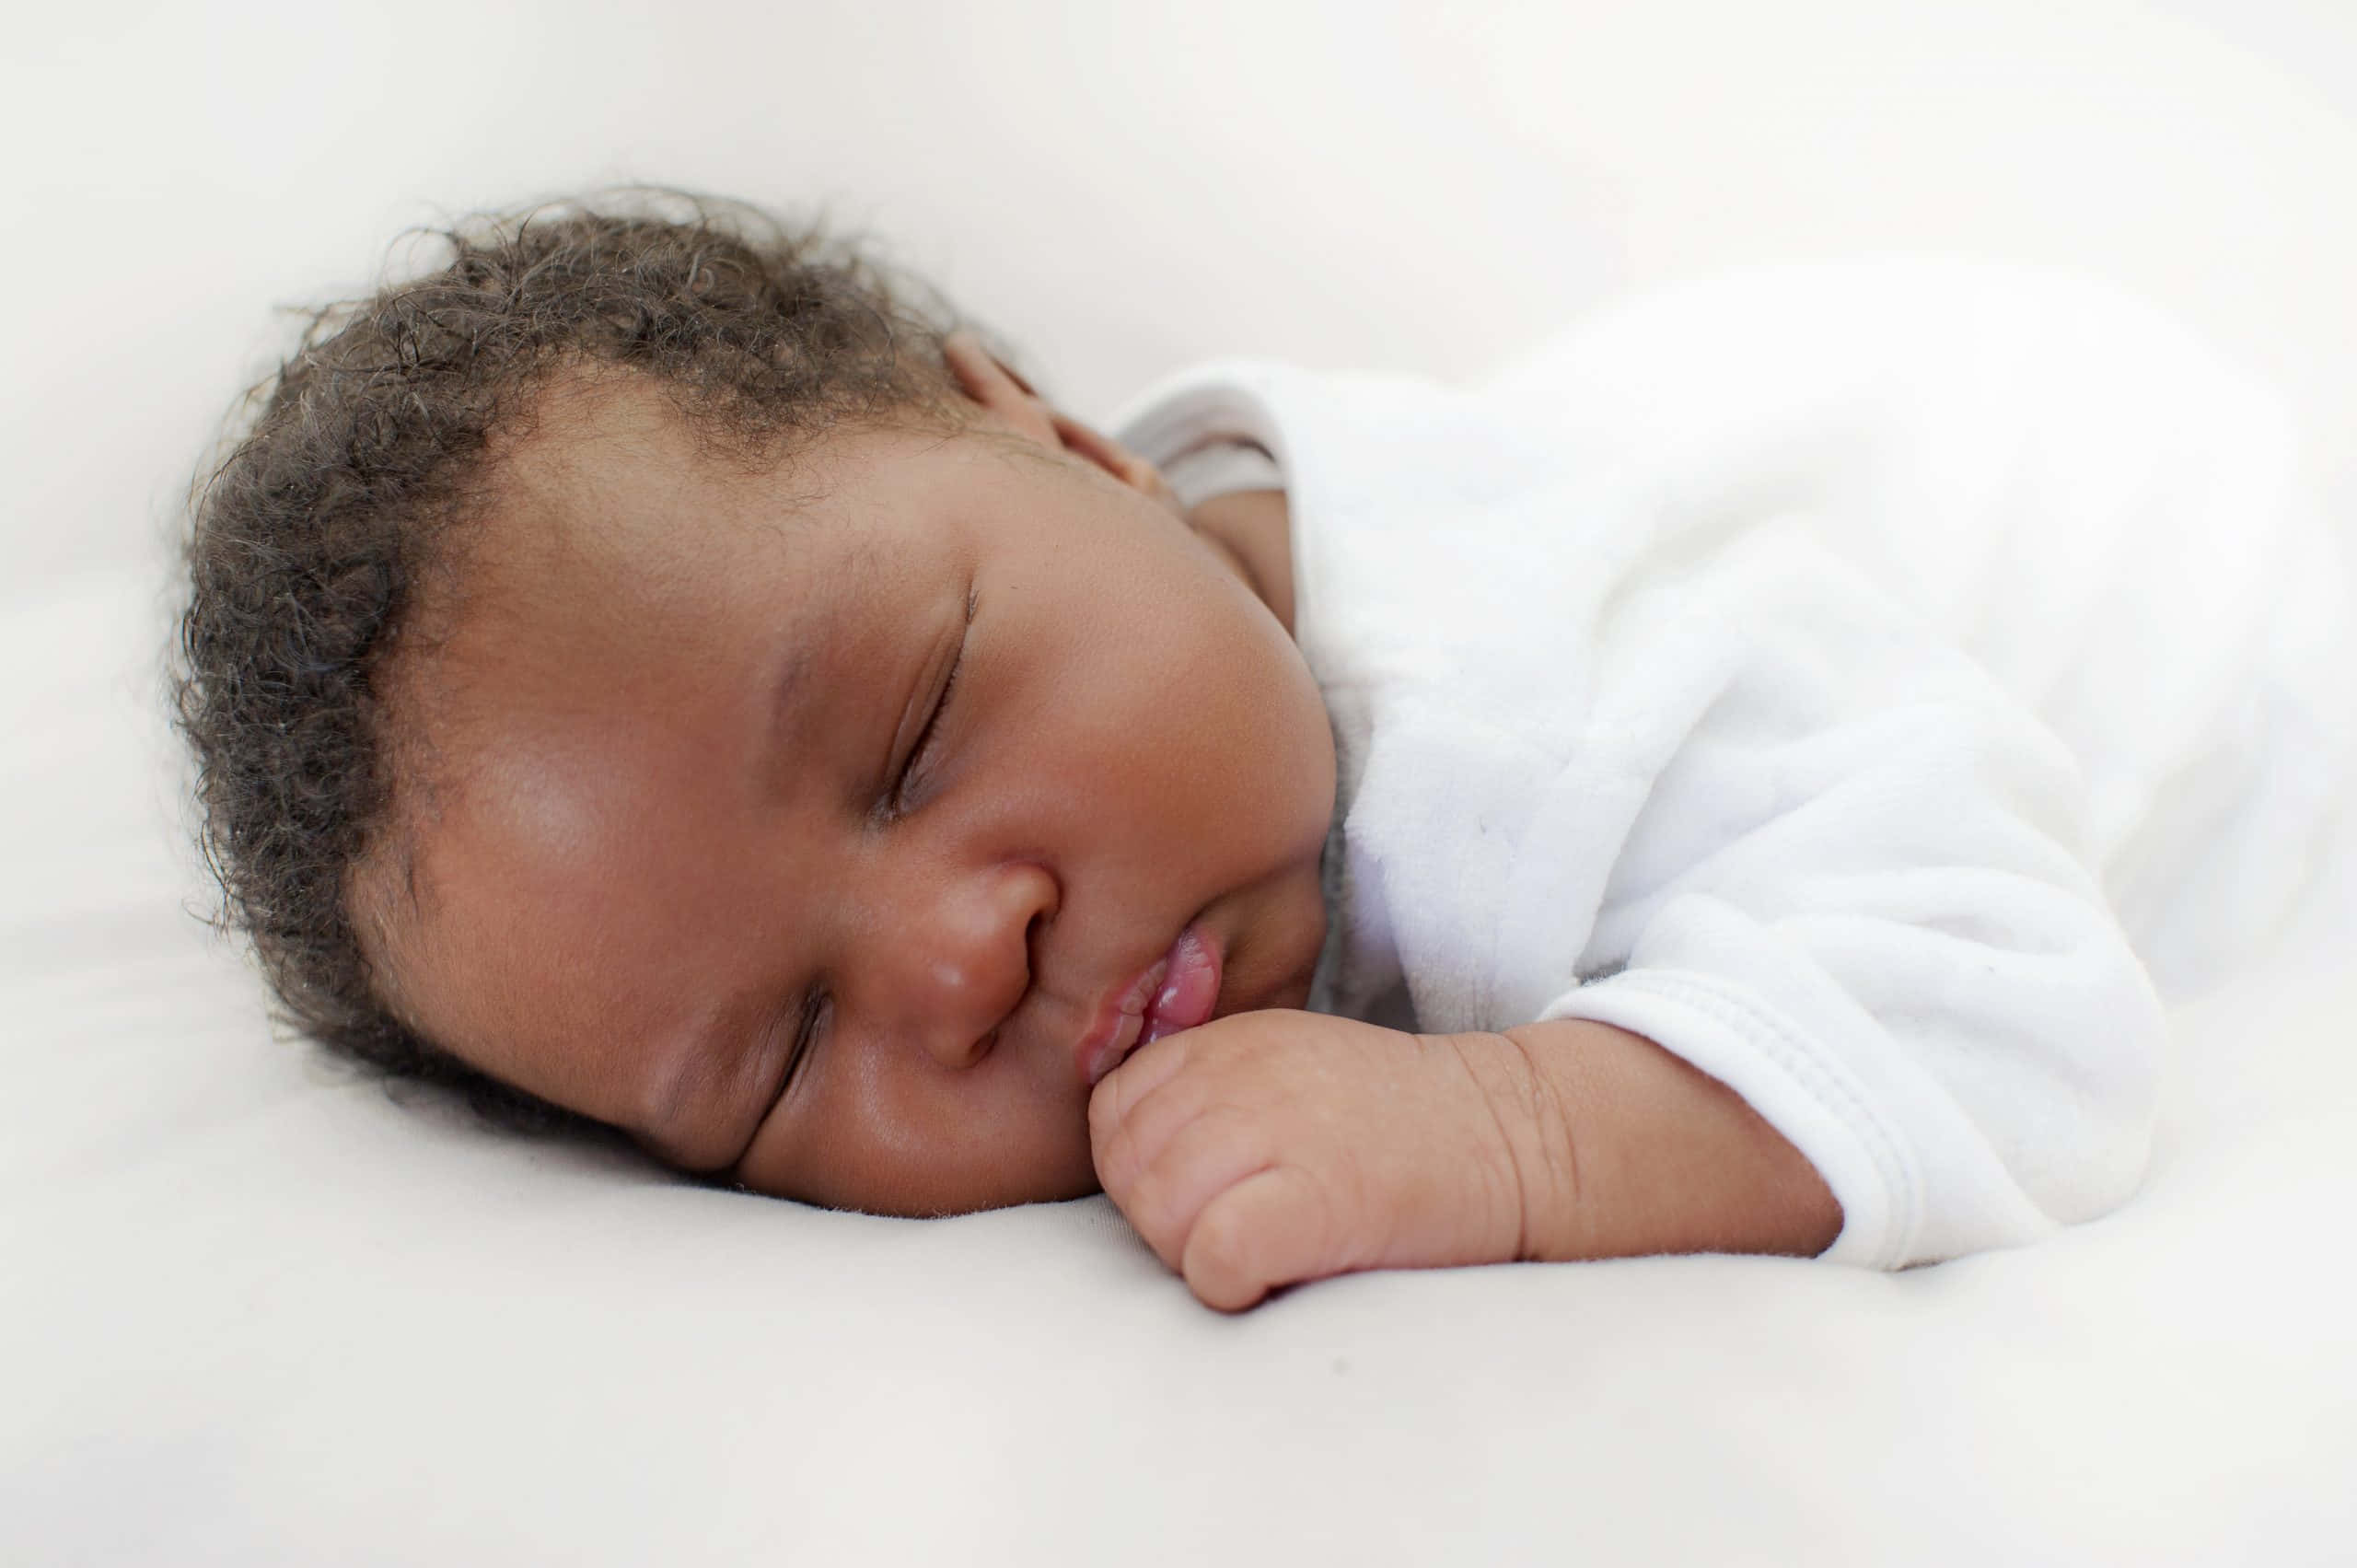 Adorable Newborn Baby Sleeping Peacefully on a Soft Blanket